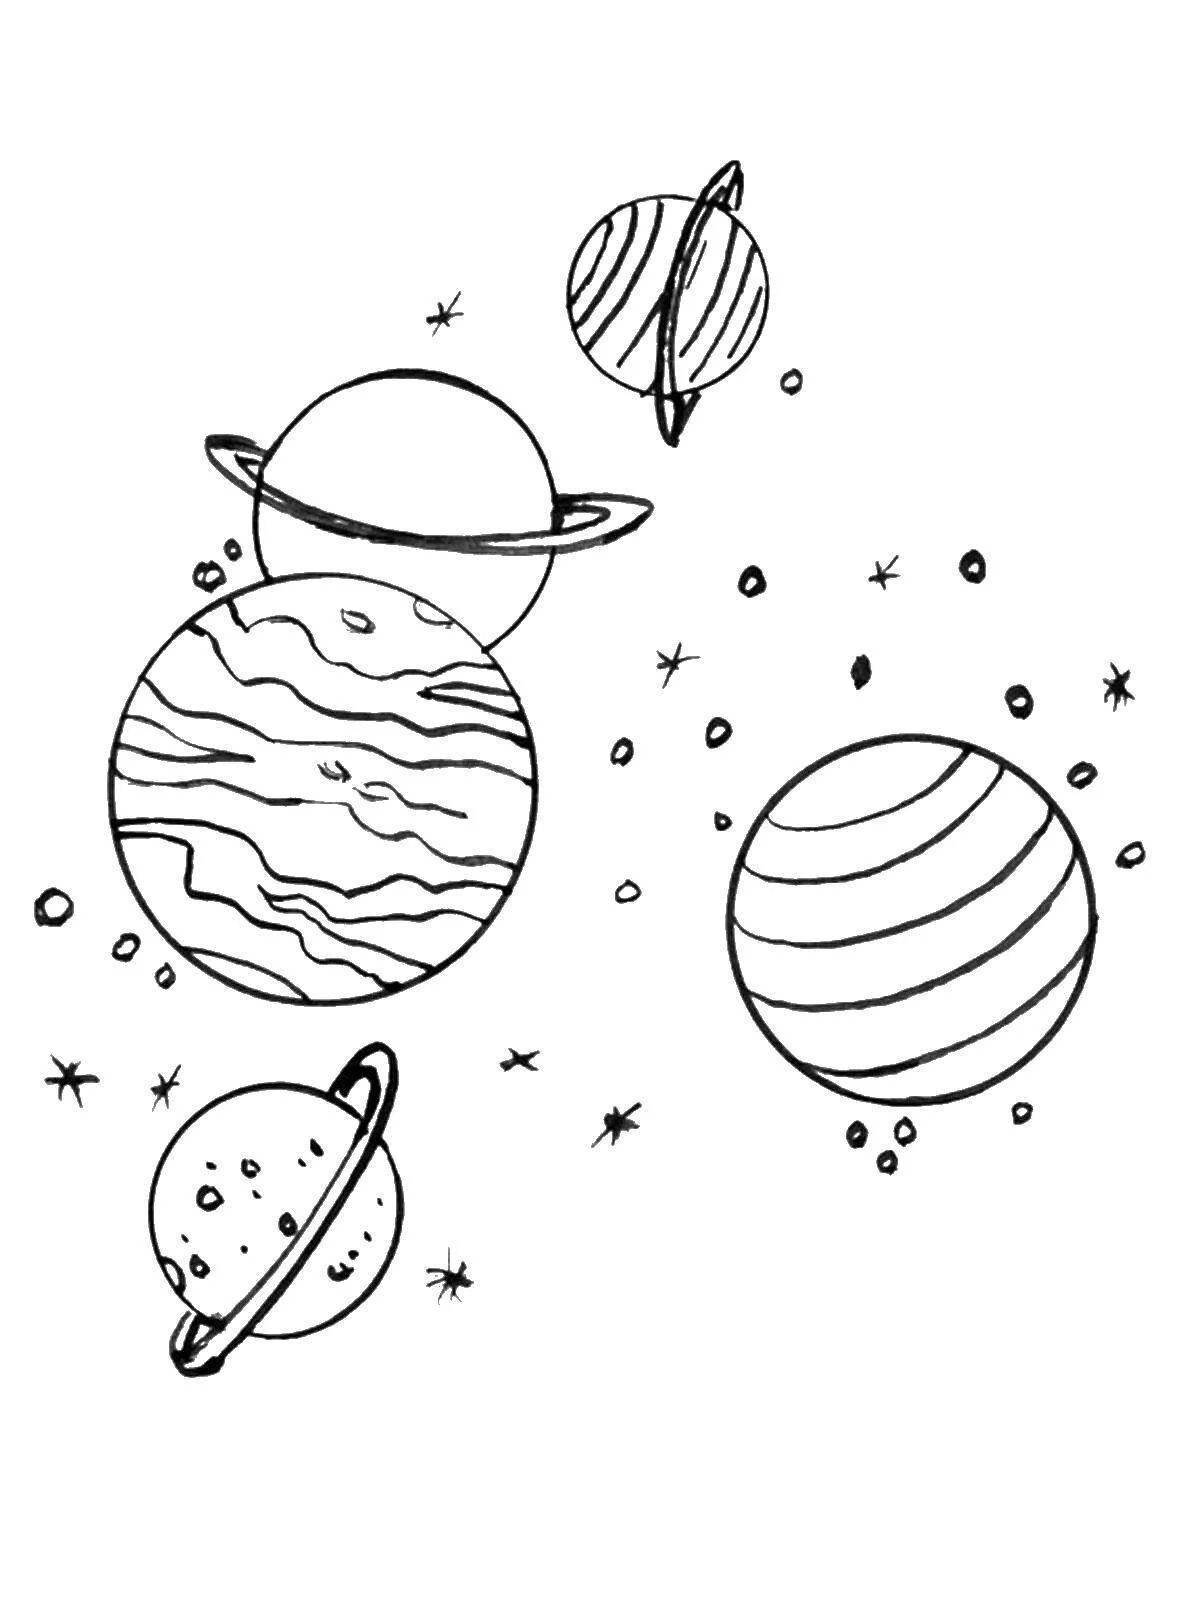 Charming coloring of the planet space